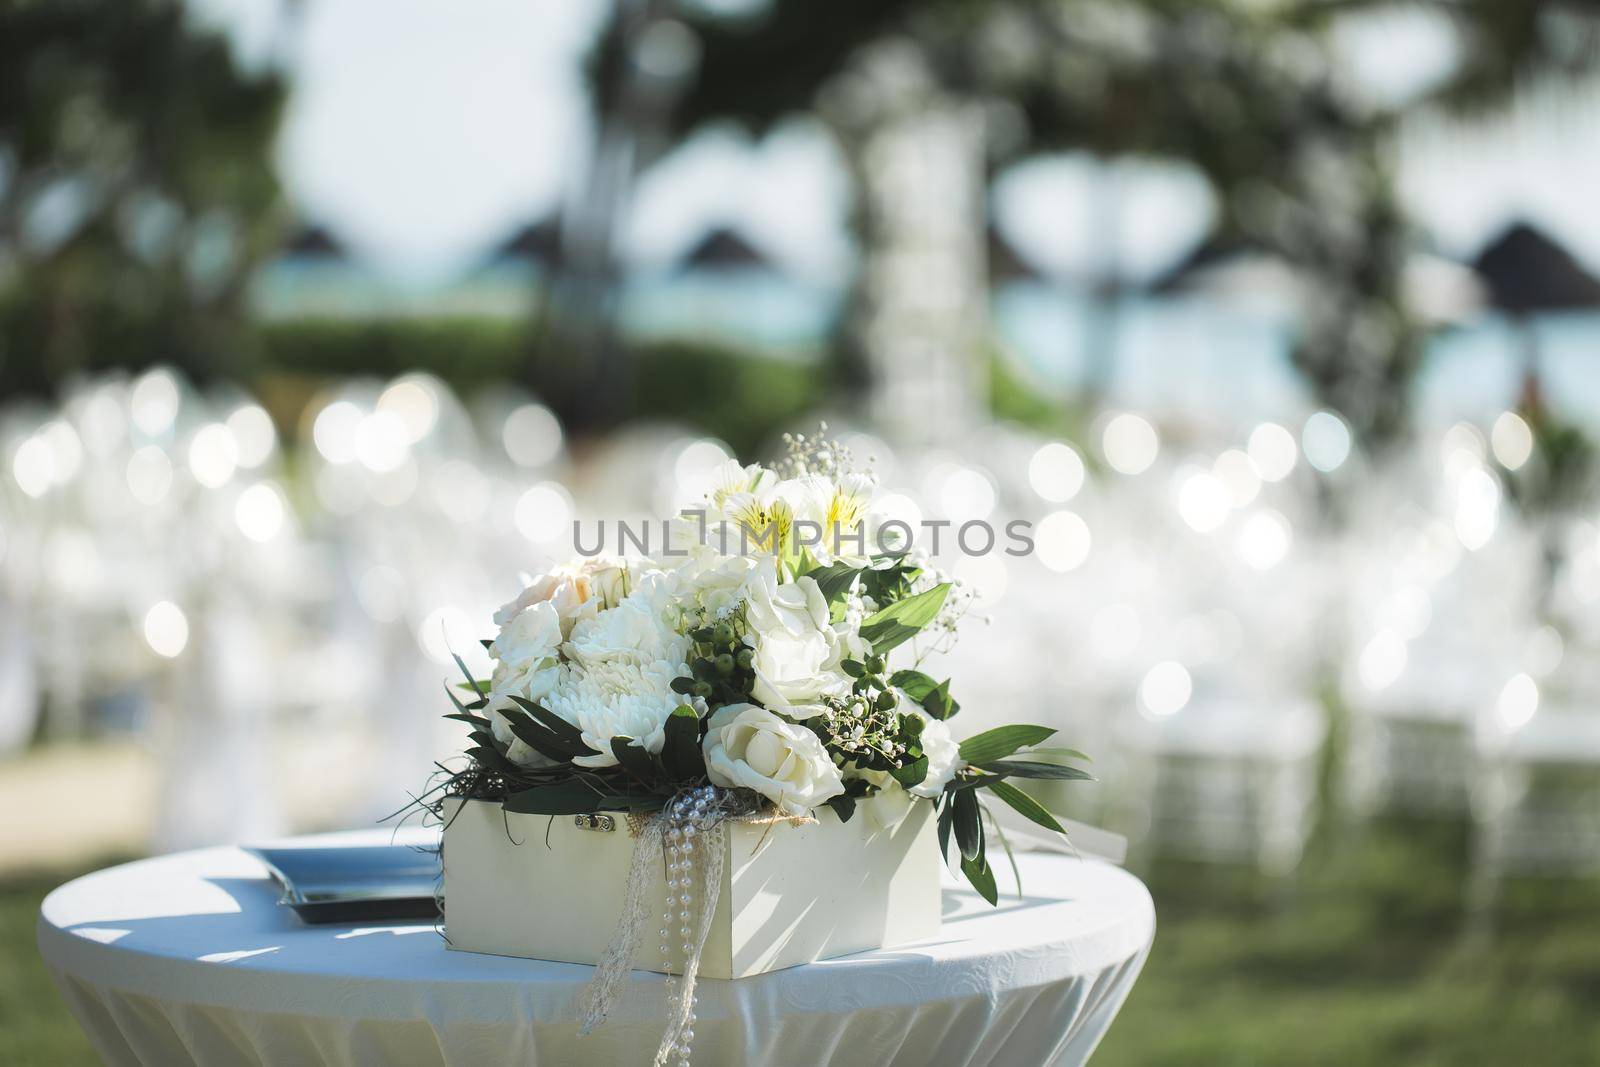 A composition of fresh flowers on the table for the wedding registration by StudioPeace